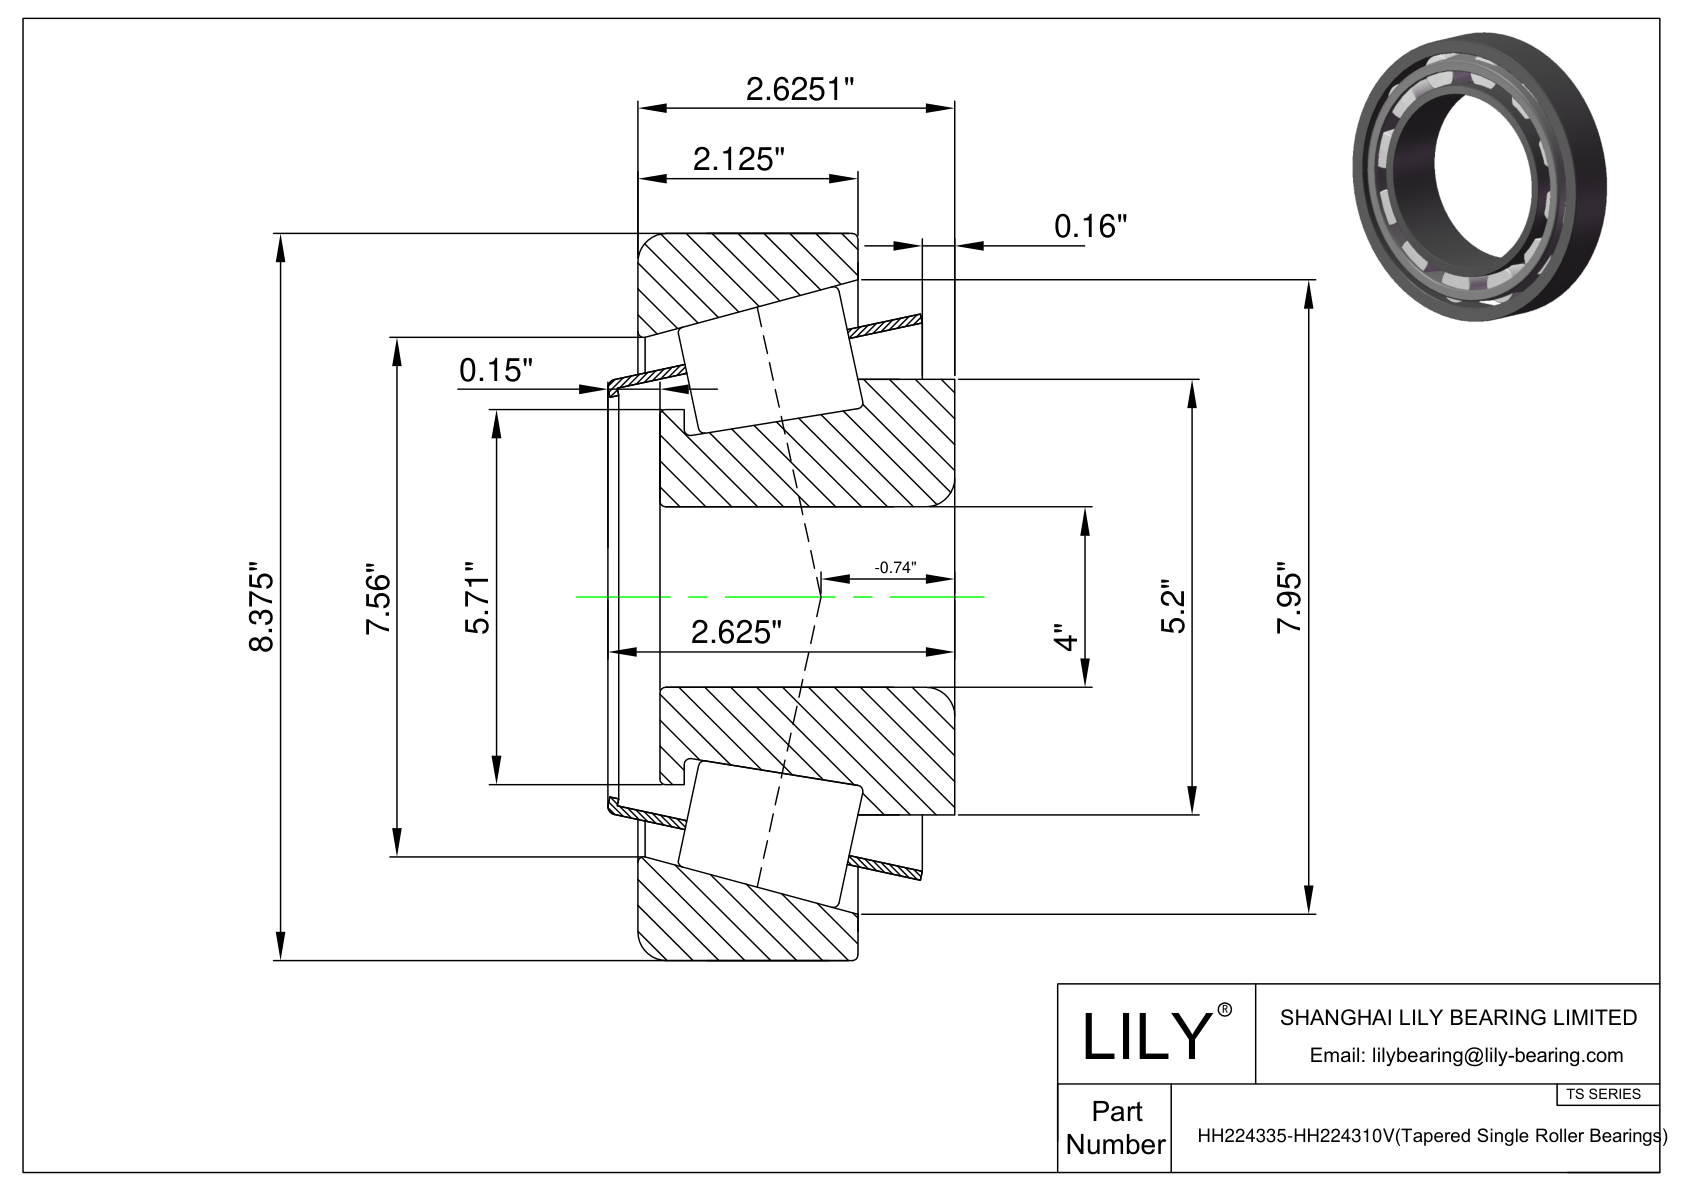 HH224335-HH224310V TS (Tapered Single Roller Bearings) (Imperial) cad drawing